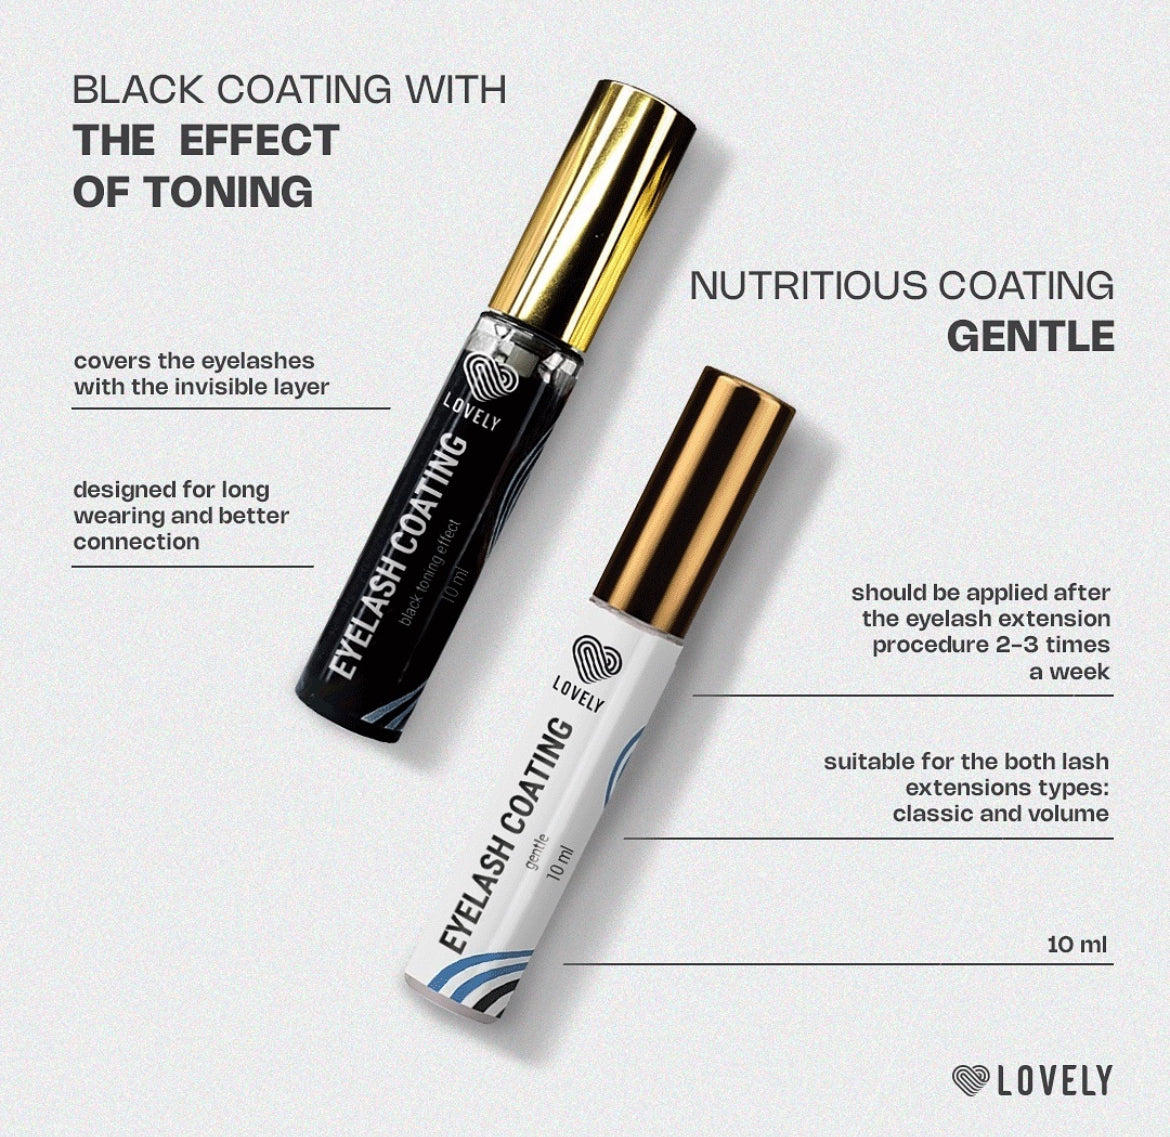 Nutritious coating Lovely ´GENTLE´ 10ml